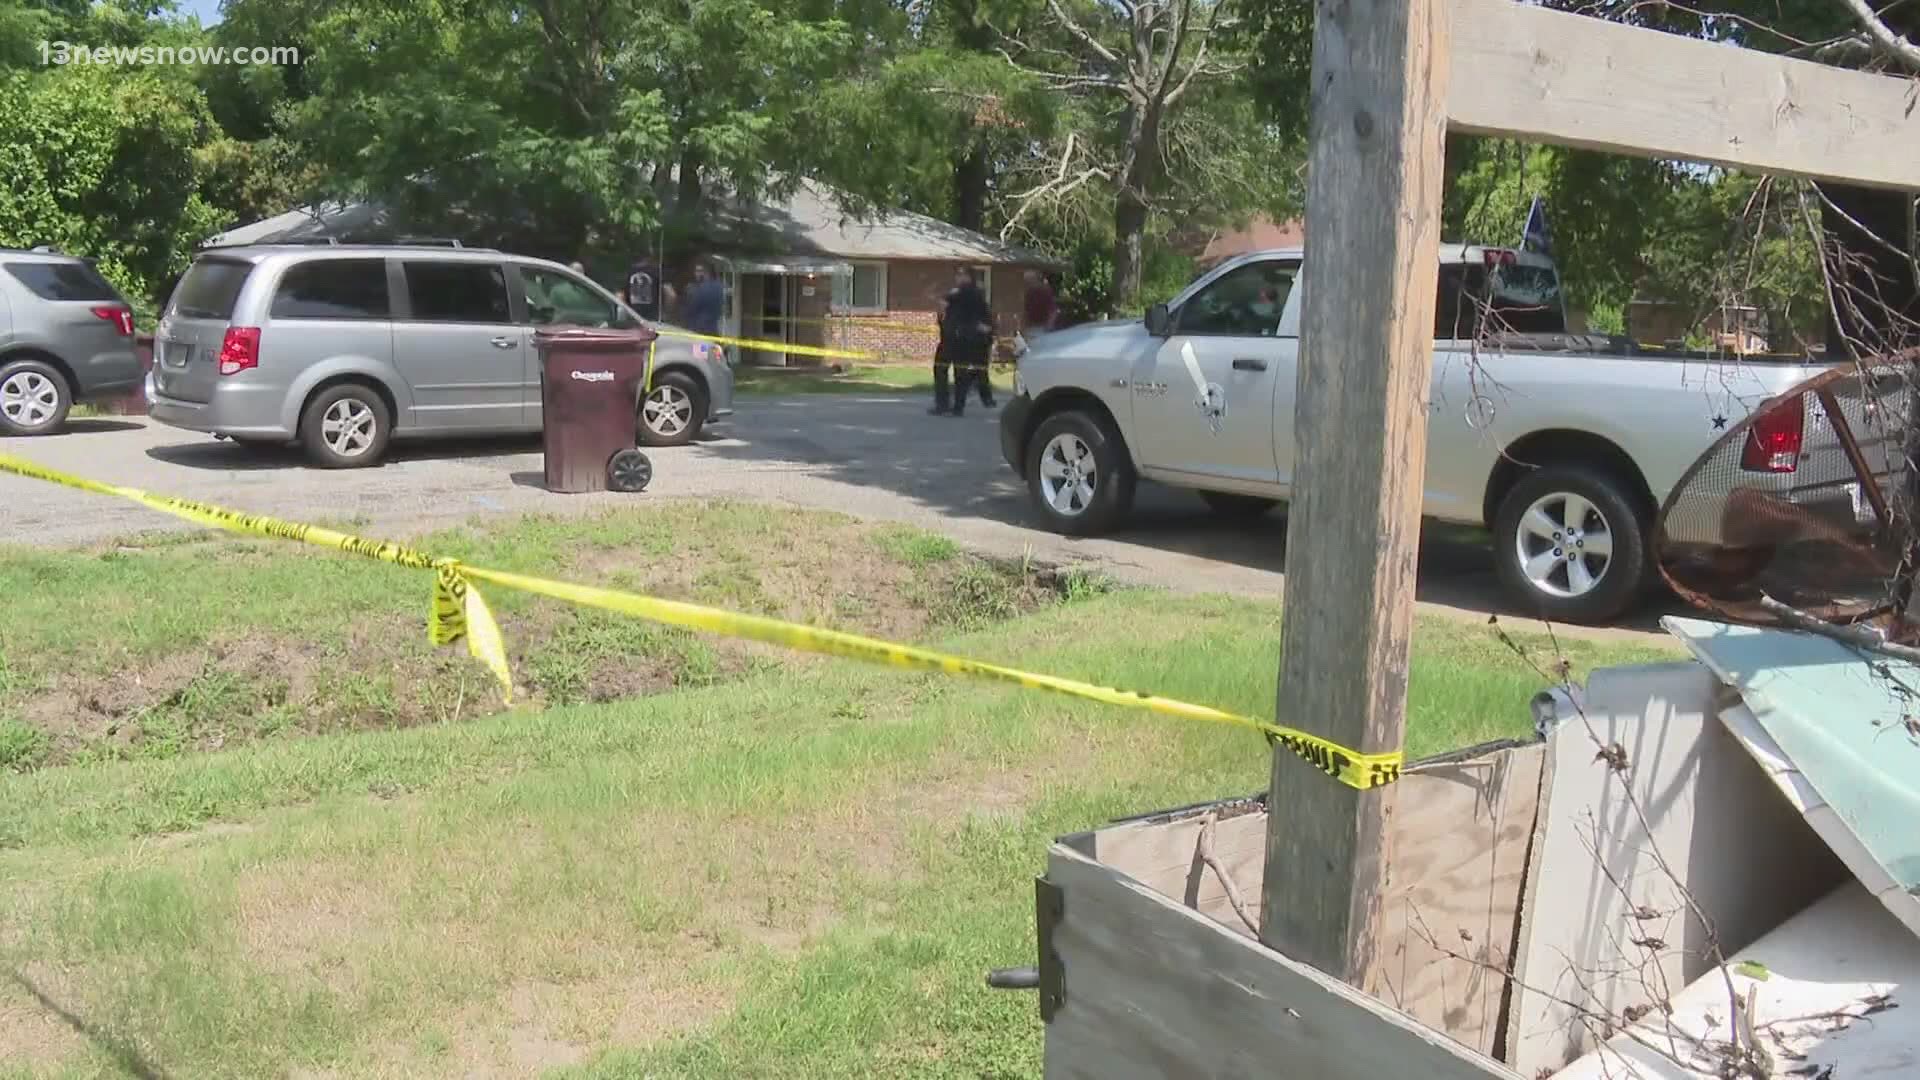 Police are looking into two shootings in Chesapeake that happened on the same street.